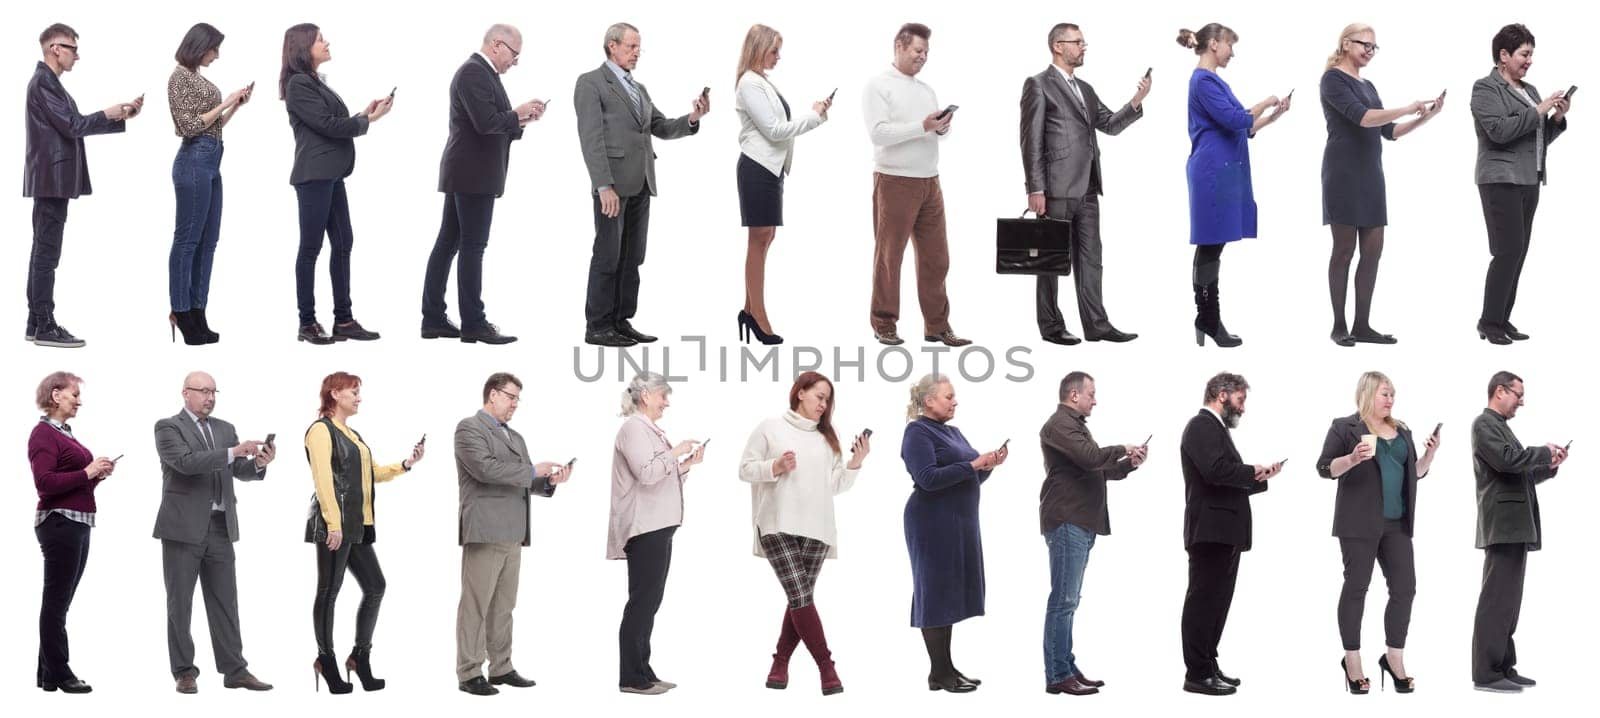 group of people profile holding phone in hand isolated by asdf